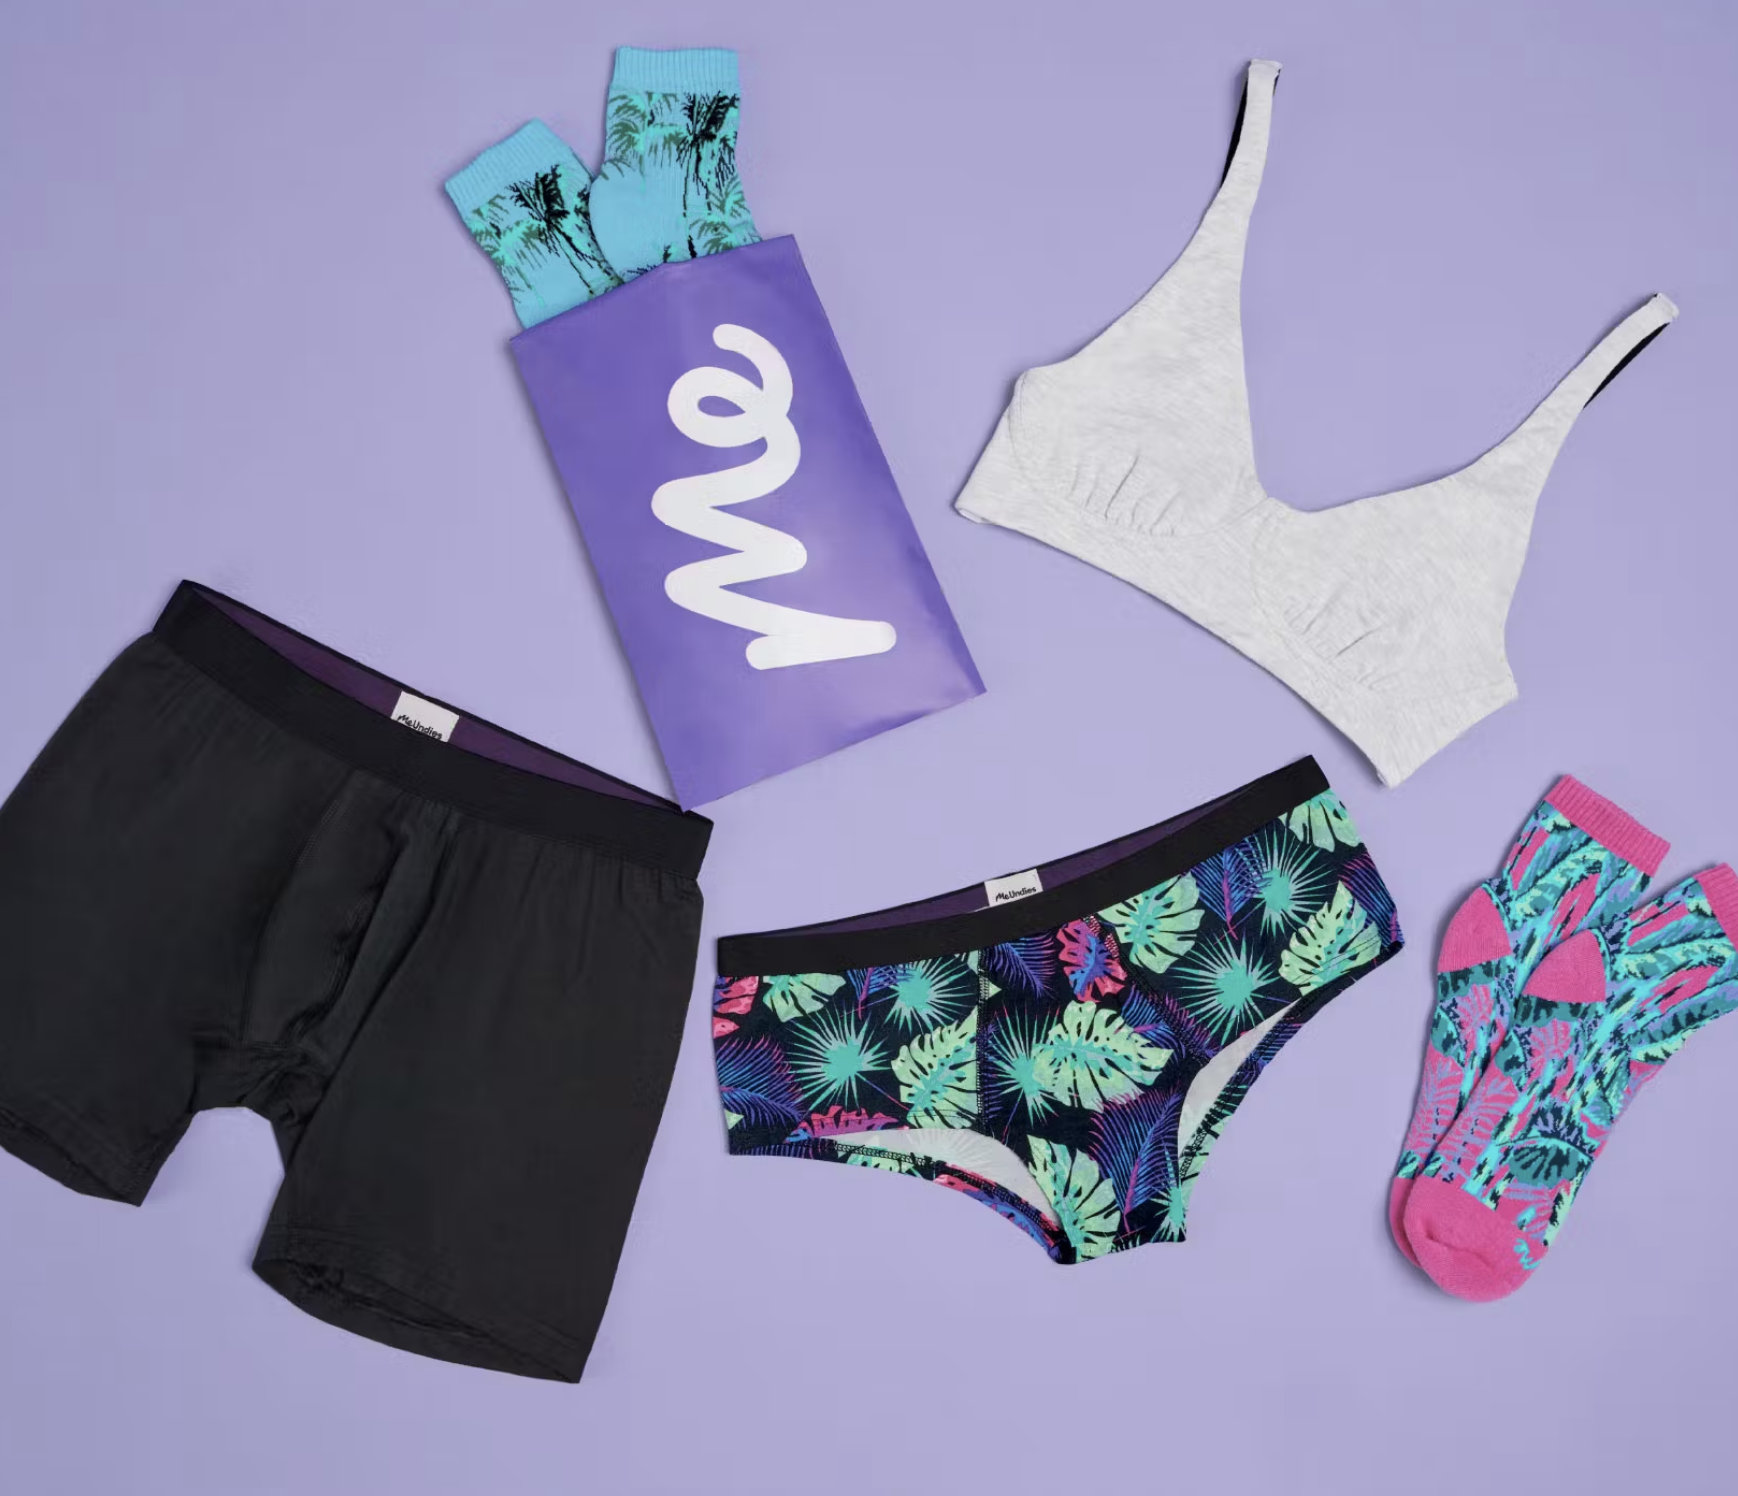 MeUndies Reviews: Get All The Details At Hello Subscription!